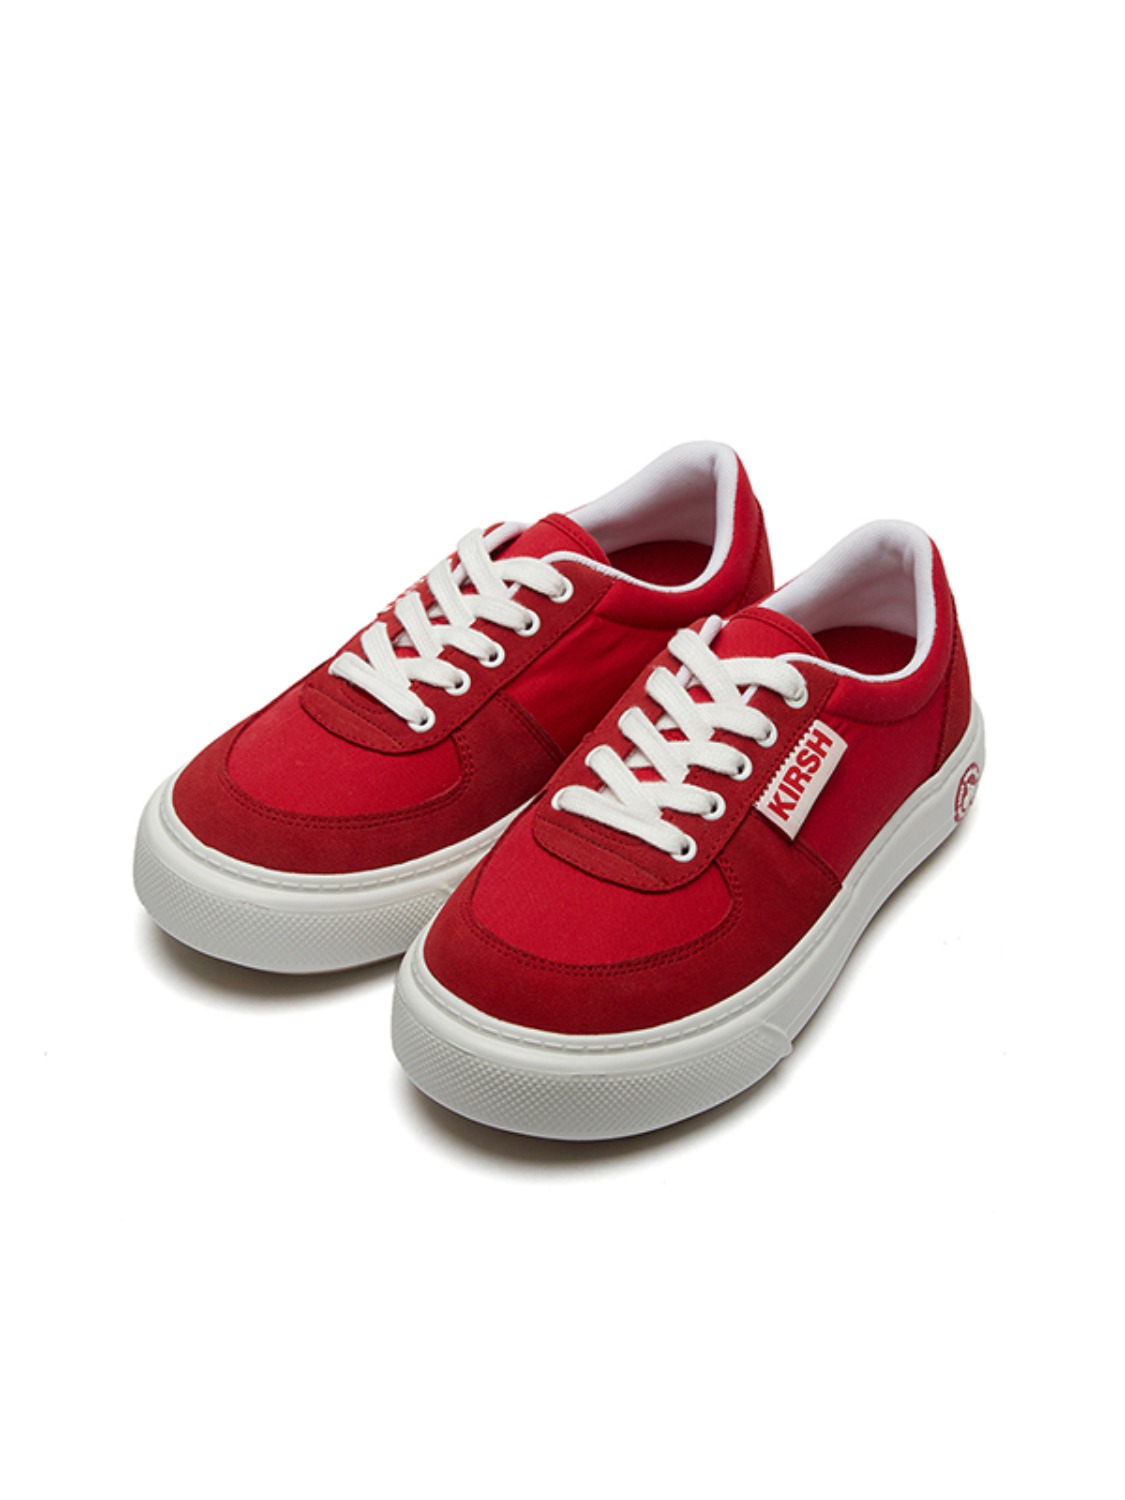 KIRSH SHOES LOW [RED]